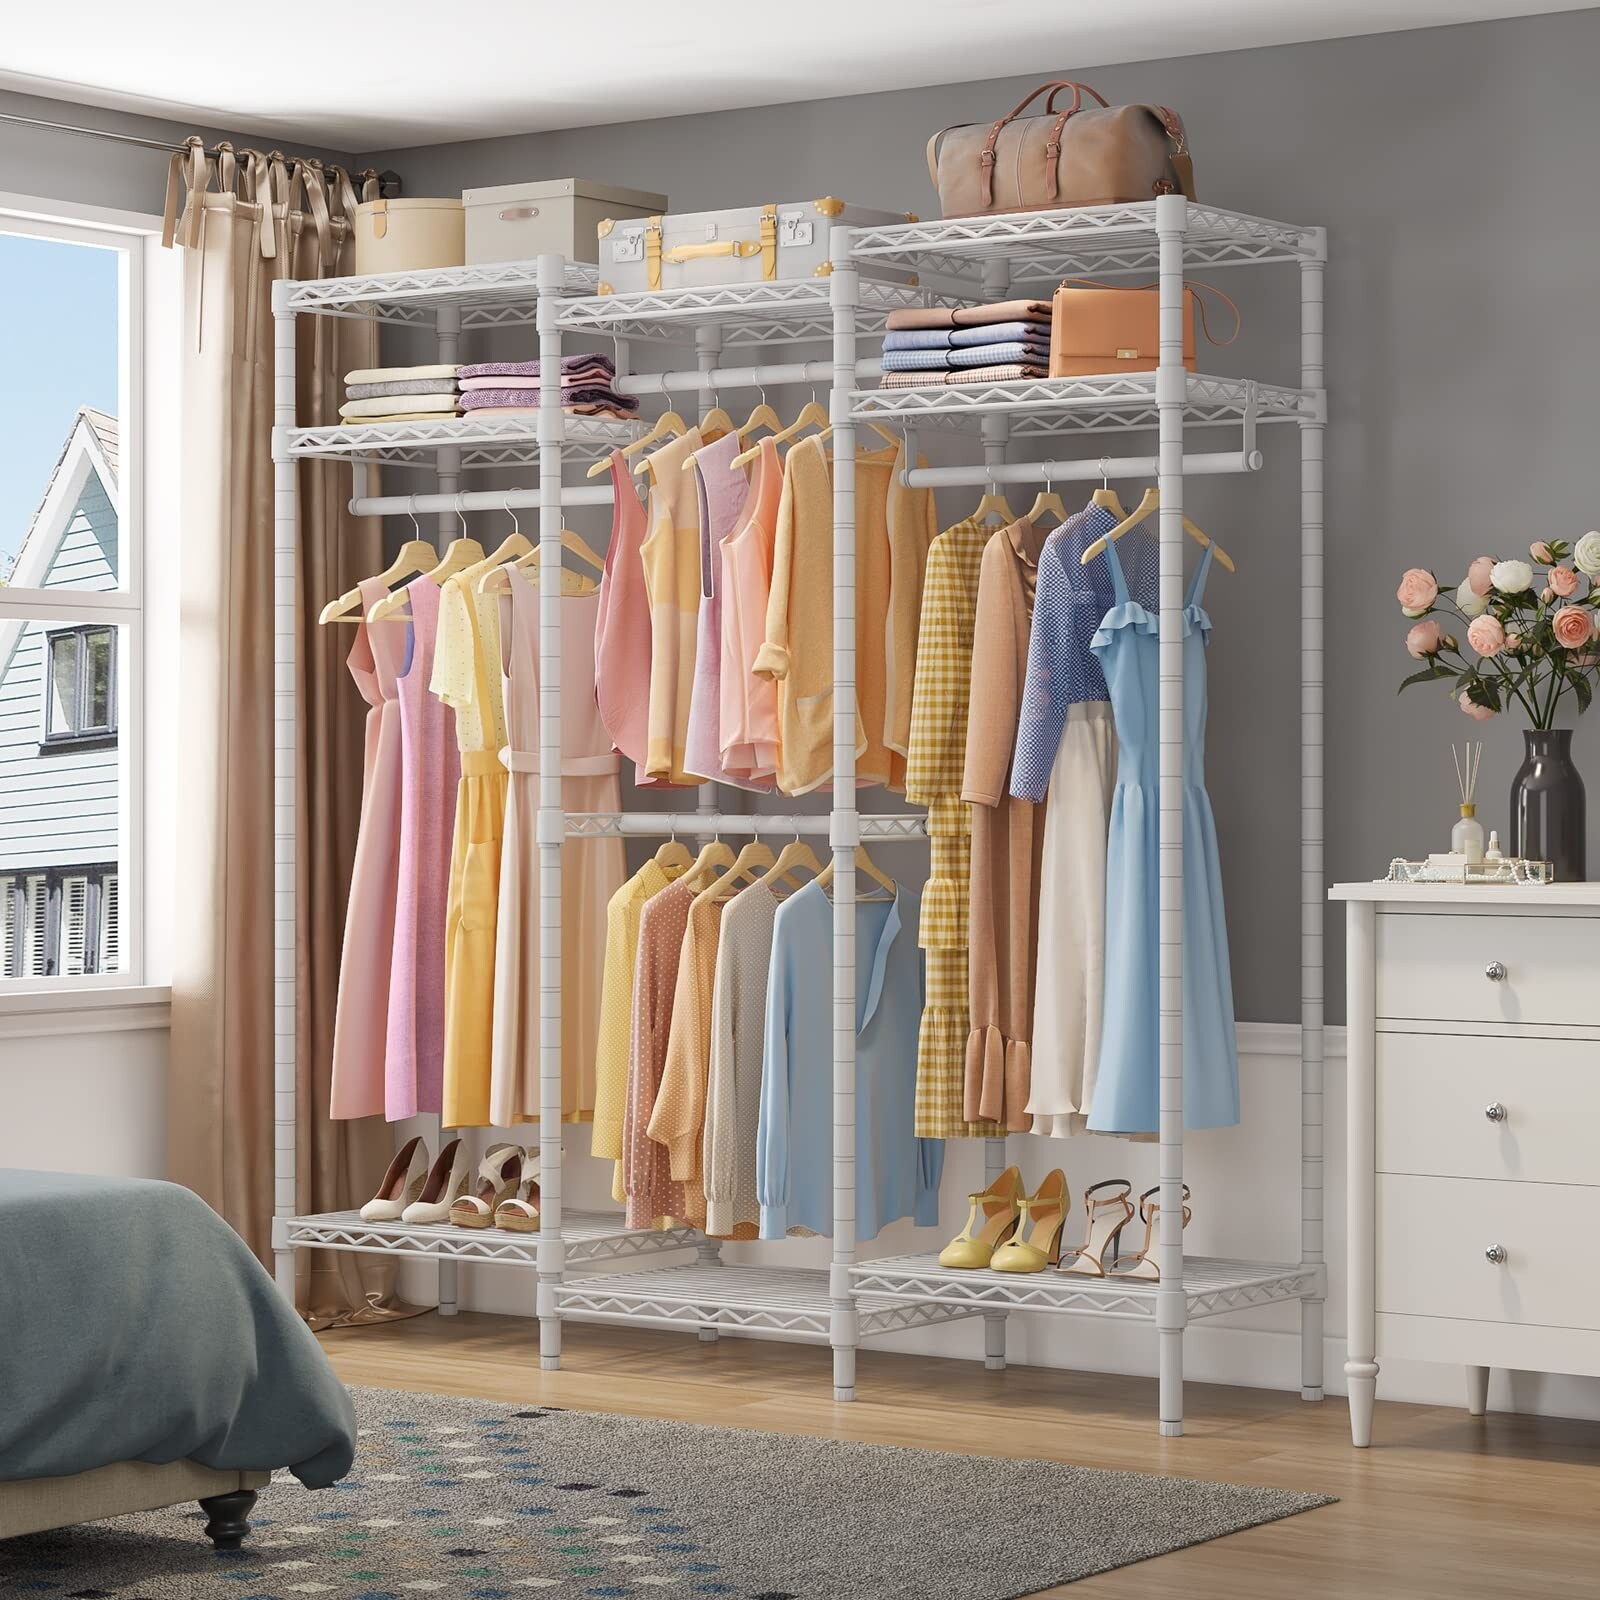 https://ak1.ostkcdn.com/images/products/is/images/direct/603736e7a6abaec61d4cb9dacb538d99d7139921/Garment-Rack-Bedroom-Freestanding-Closet-Organizer%2C-Wardrobe-Closet-Heavy-Duty-Clothing-Rack-with-Adjustable-Shelves-%26-Hang-Rods.jpg